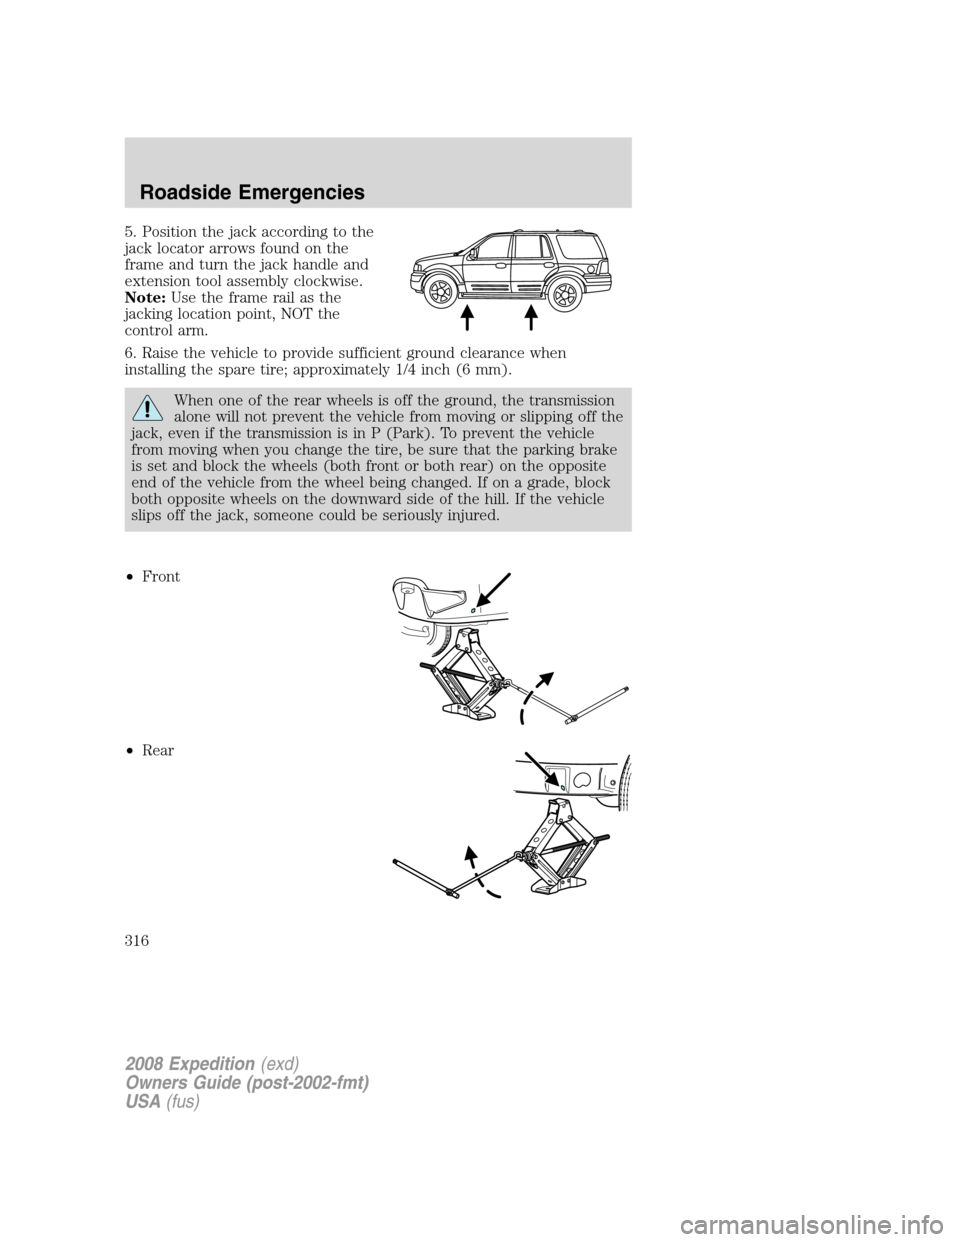 FORD EXPEDITION 2008 3.G Owners Manual 
5. Position the jack according to the
jack locator arrows found on the
frame and turn the jack handle and
extension tool assembly clockwise.
Note:Use the frame rail as the
jacking location point, NOT